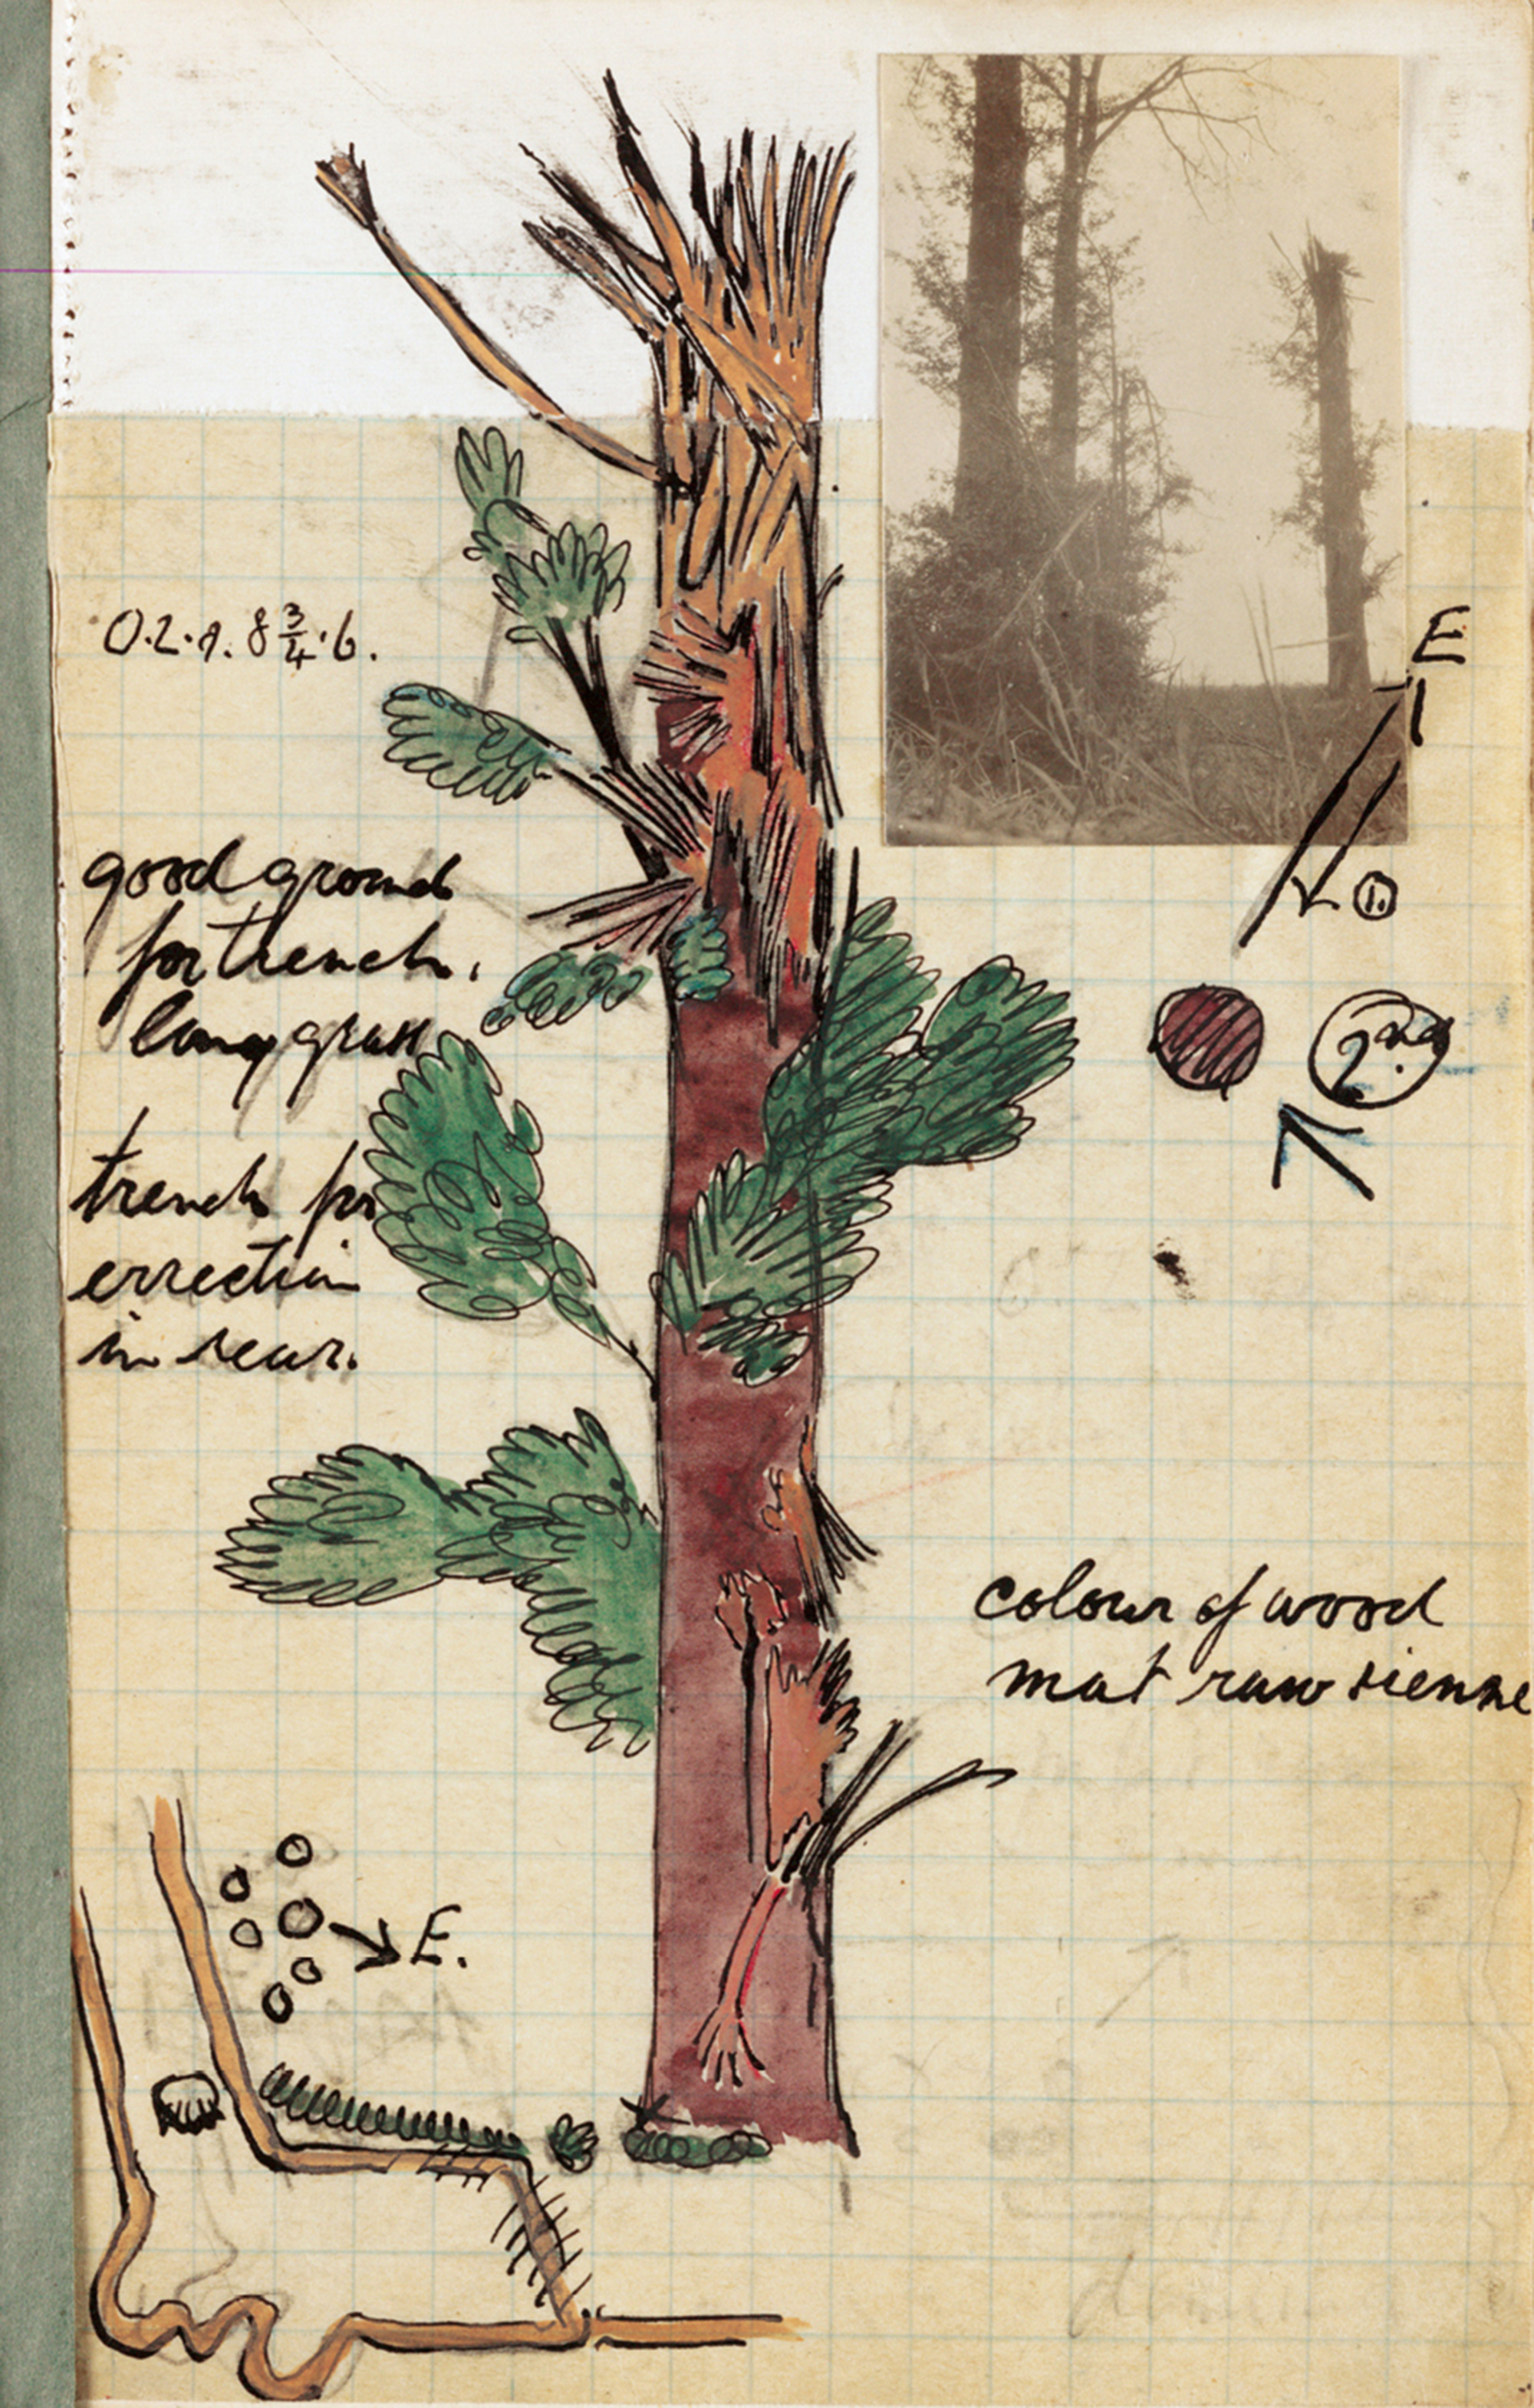 A drawing with collaged photograph from Leon Underwood’s notebook showing details of a tree that would later serve as the model for a camouflage observation post. An arrowed E indicates the enemy’s view of the tree.